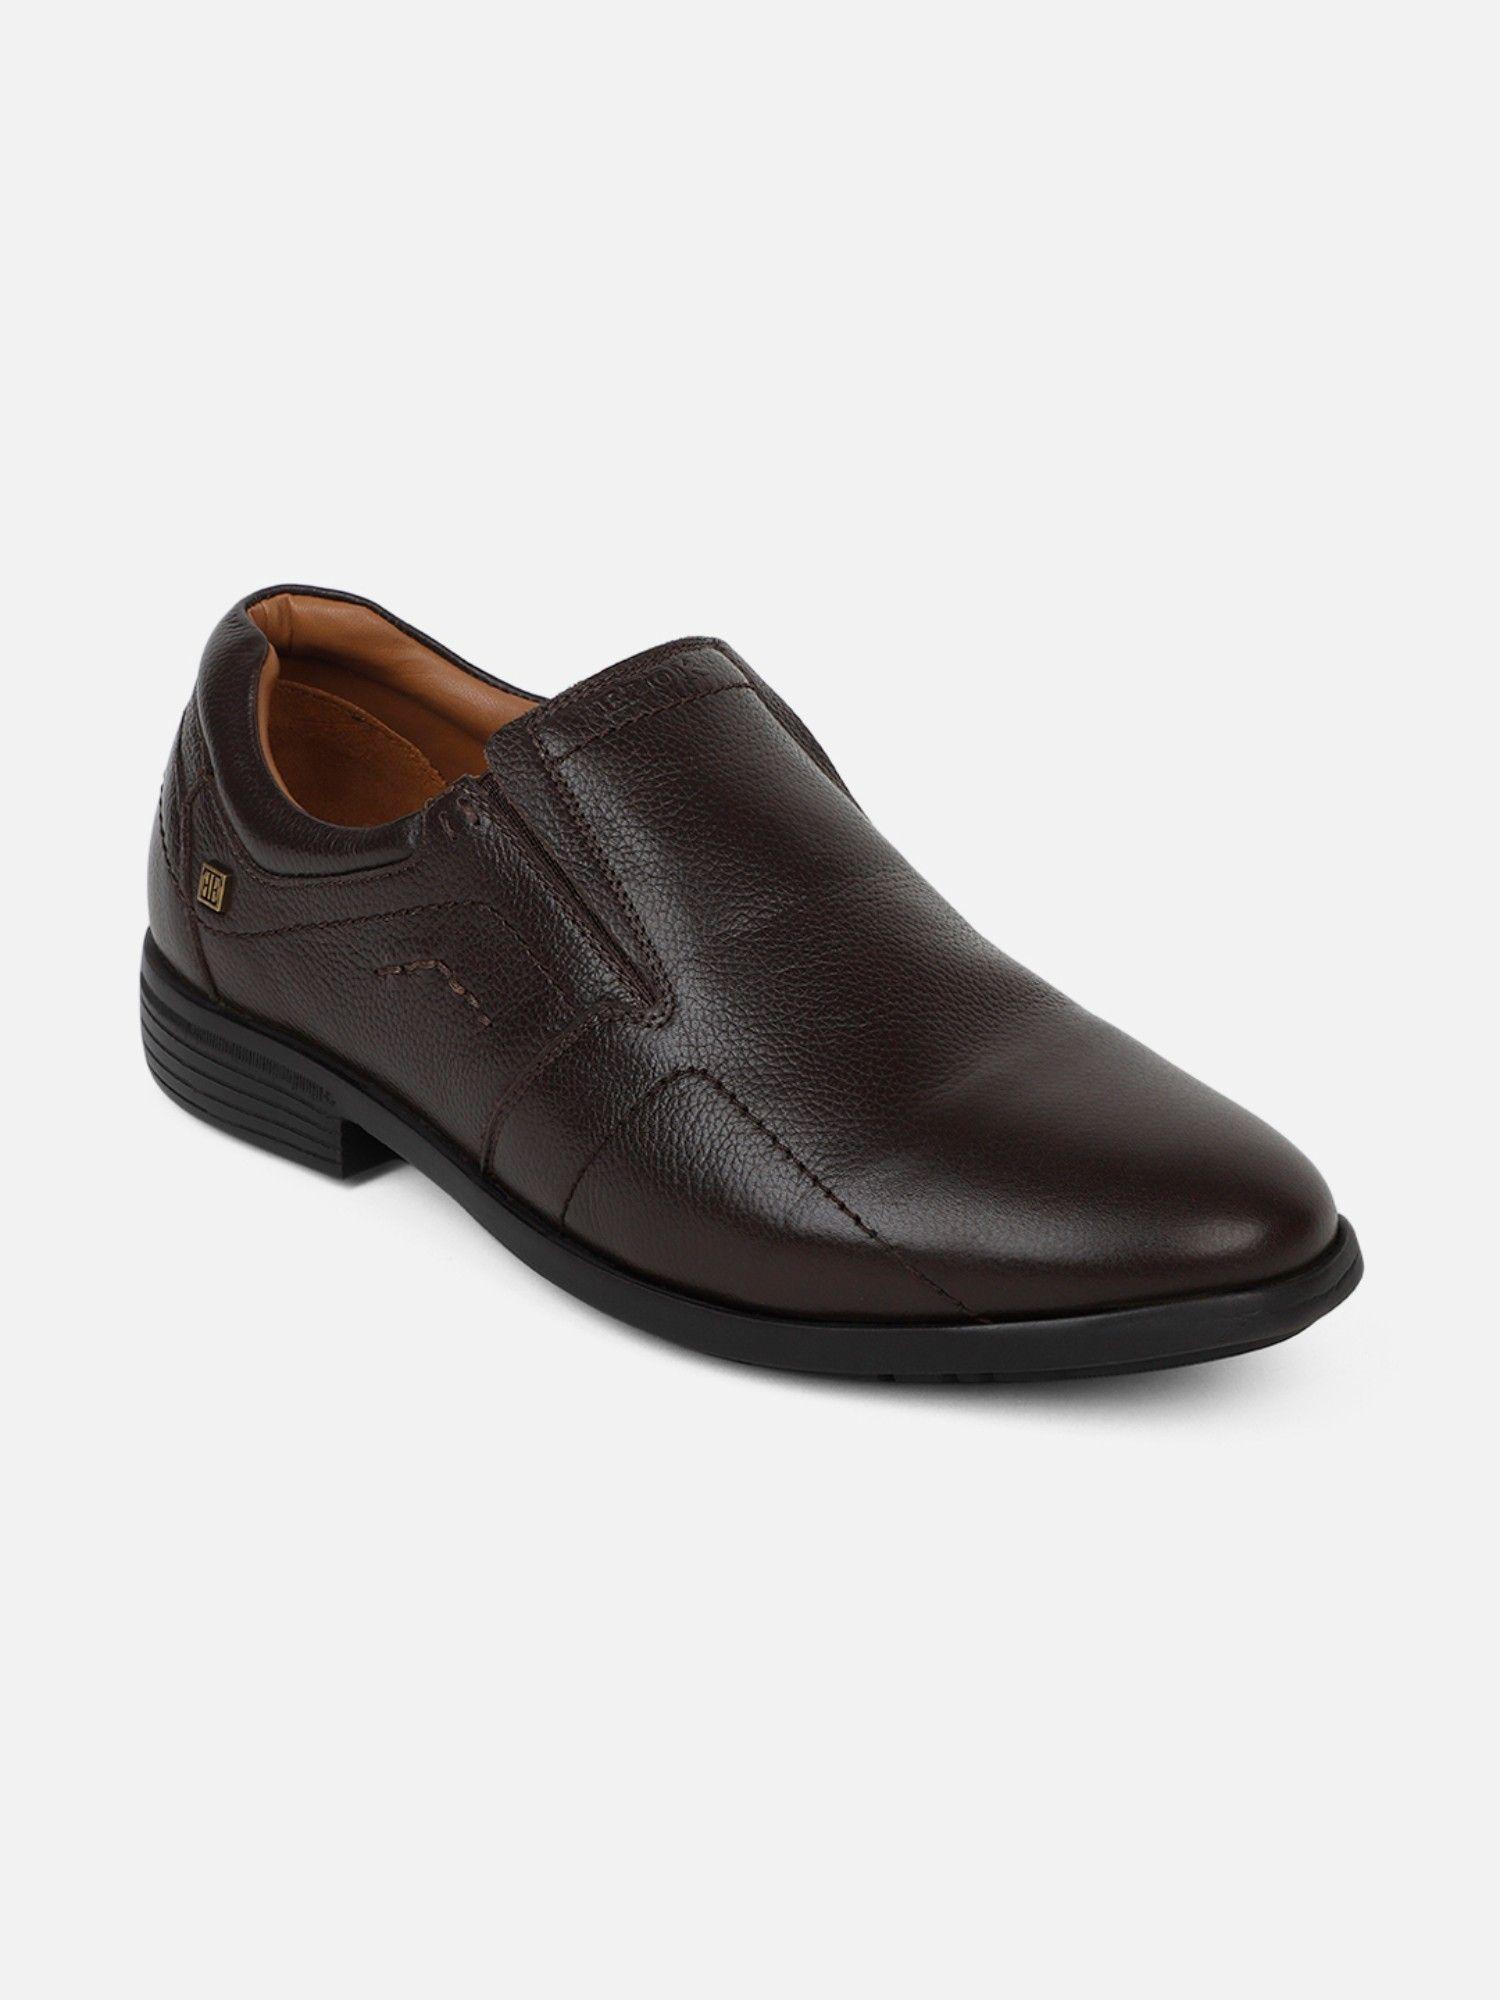 men leather formal shoes brown